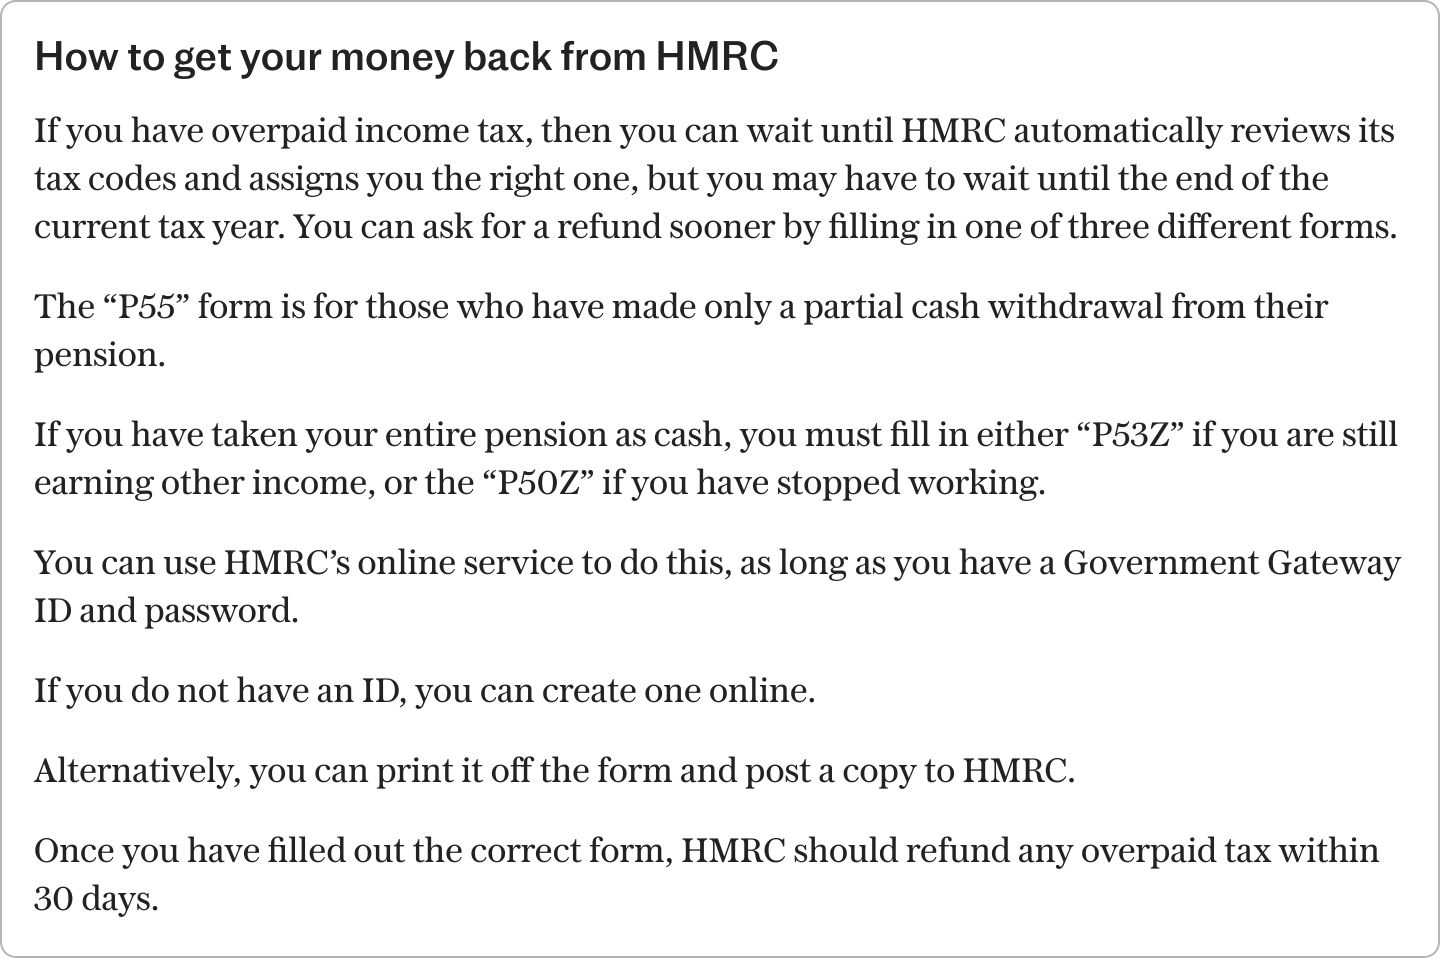 hmrc overtaxes pensioners £200m after system errors